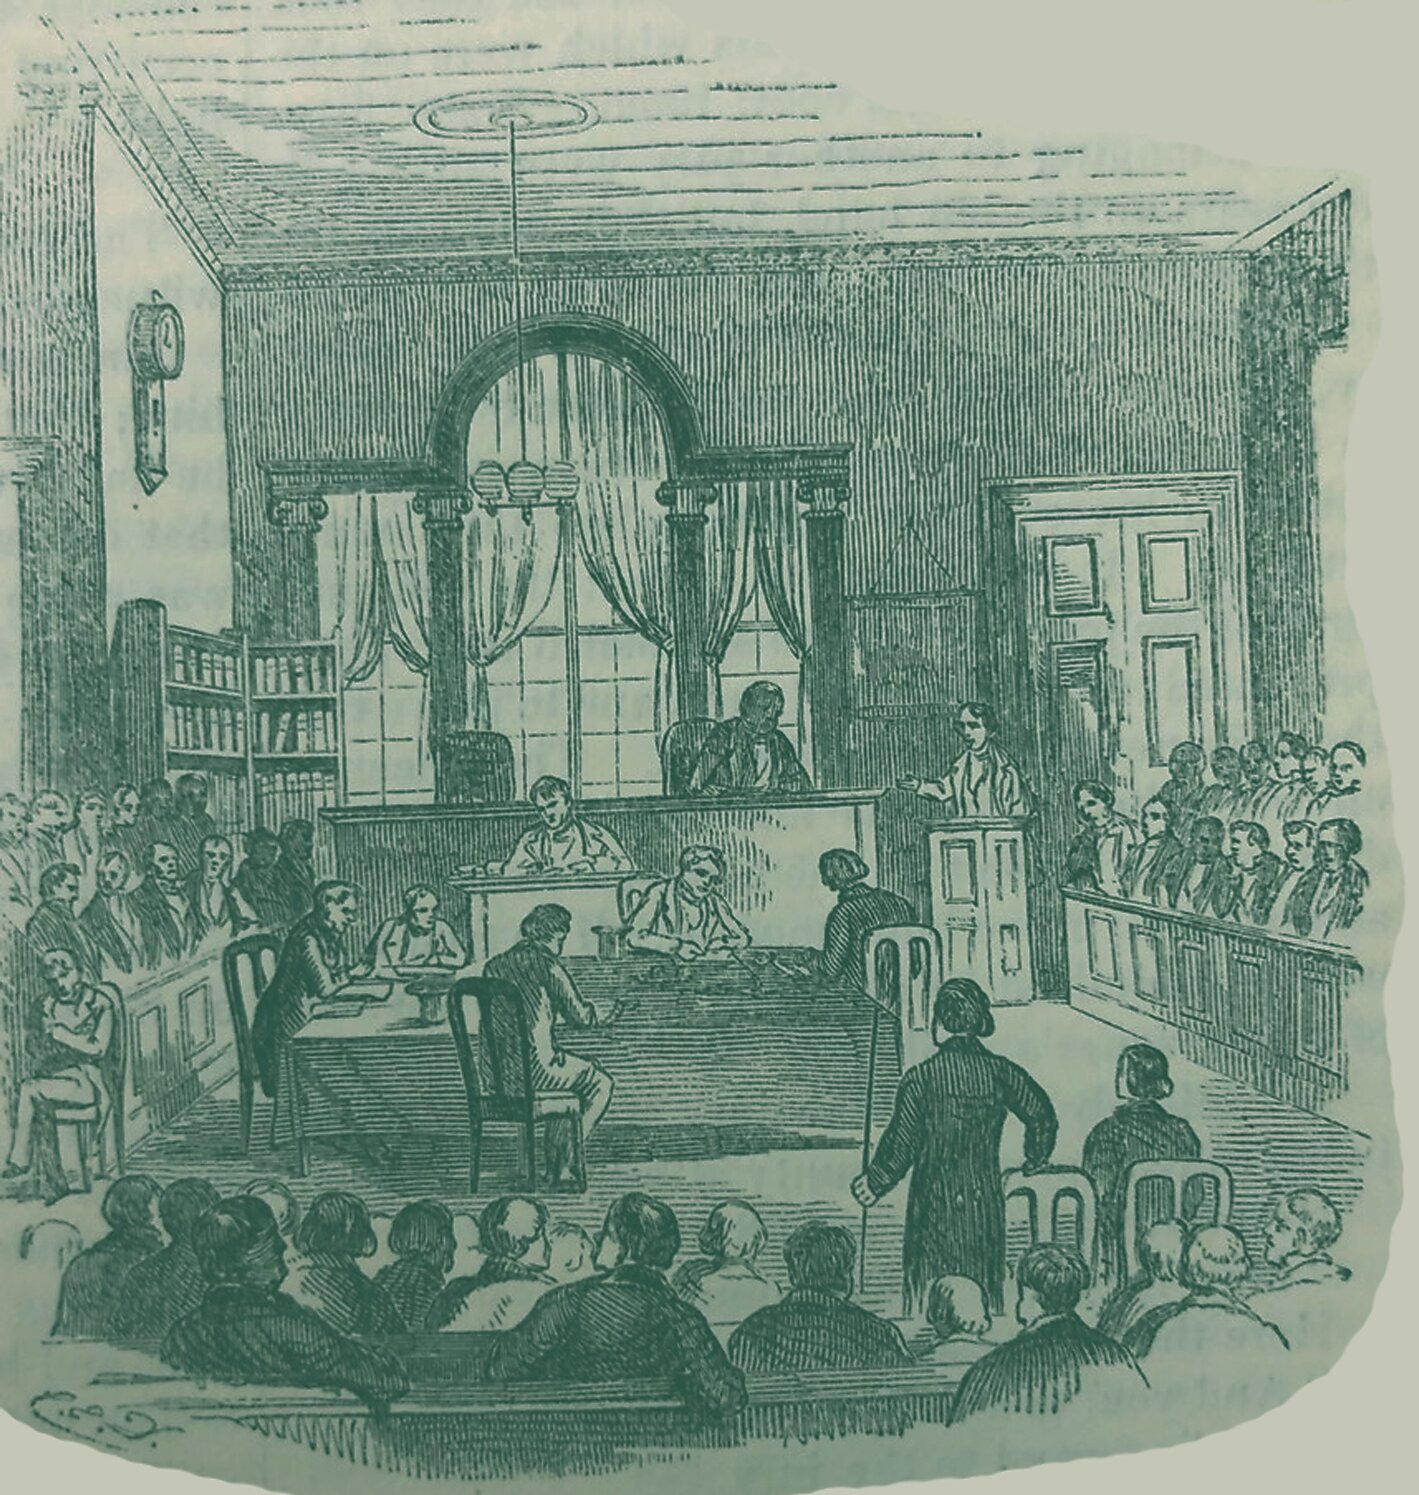 Cato Courses - Old Courtroom Illustration - BG